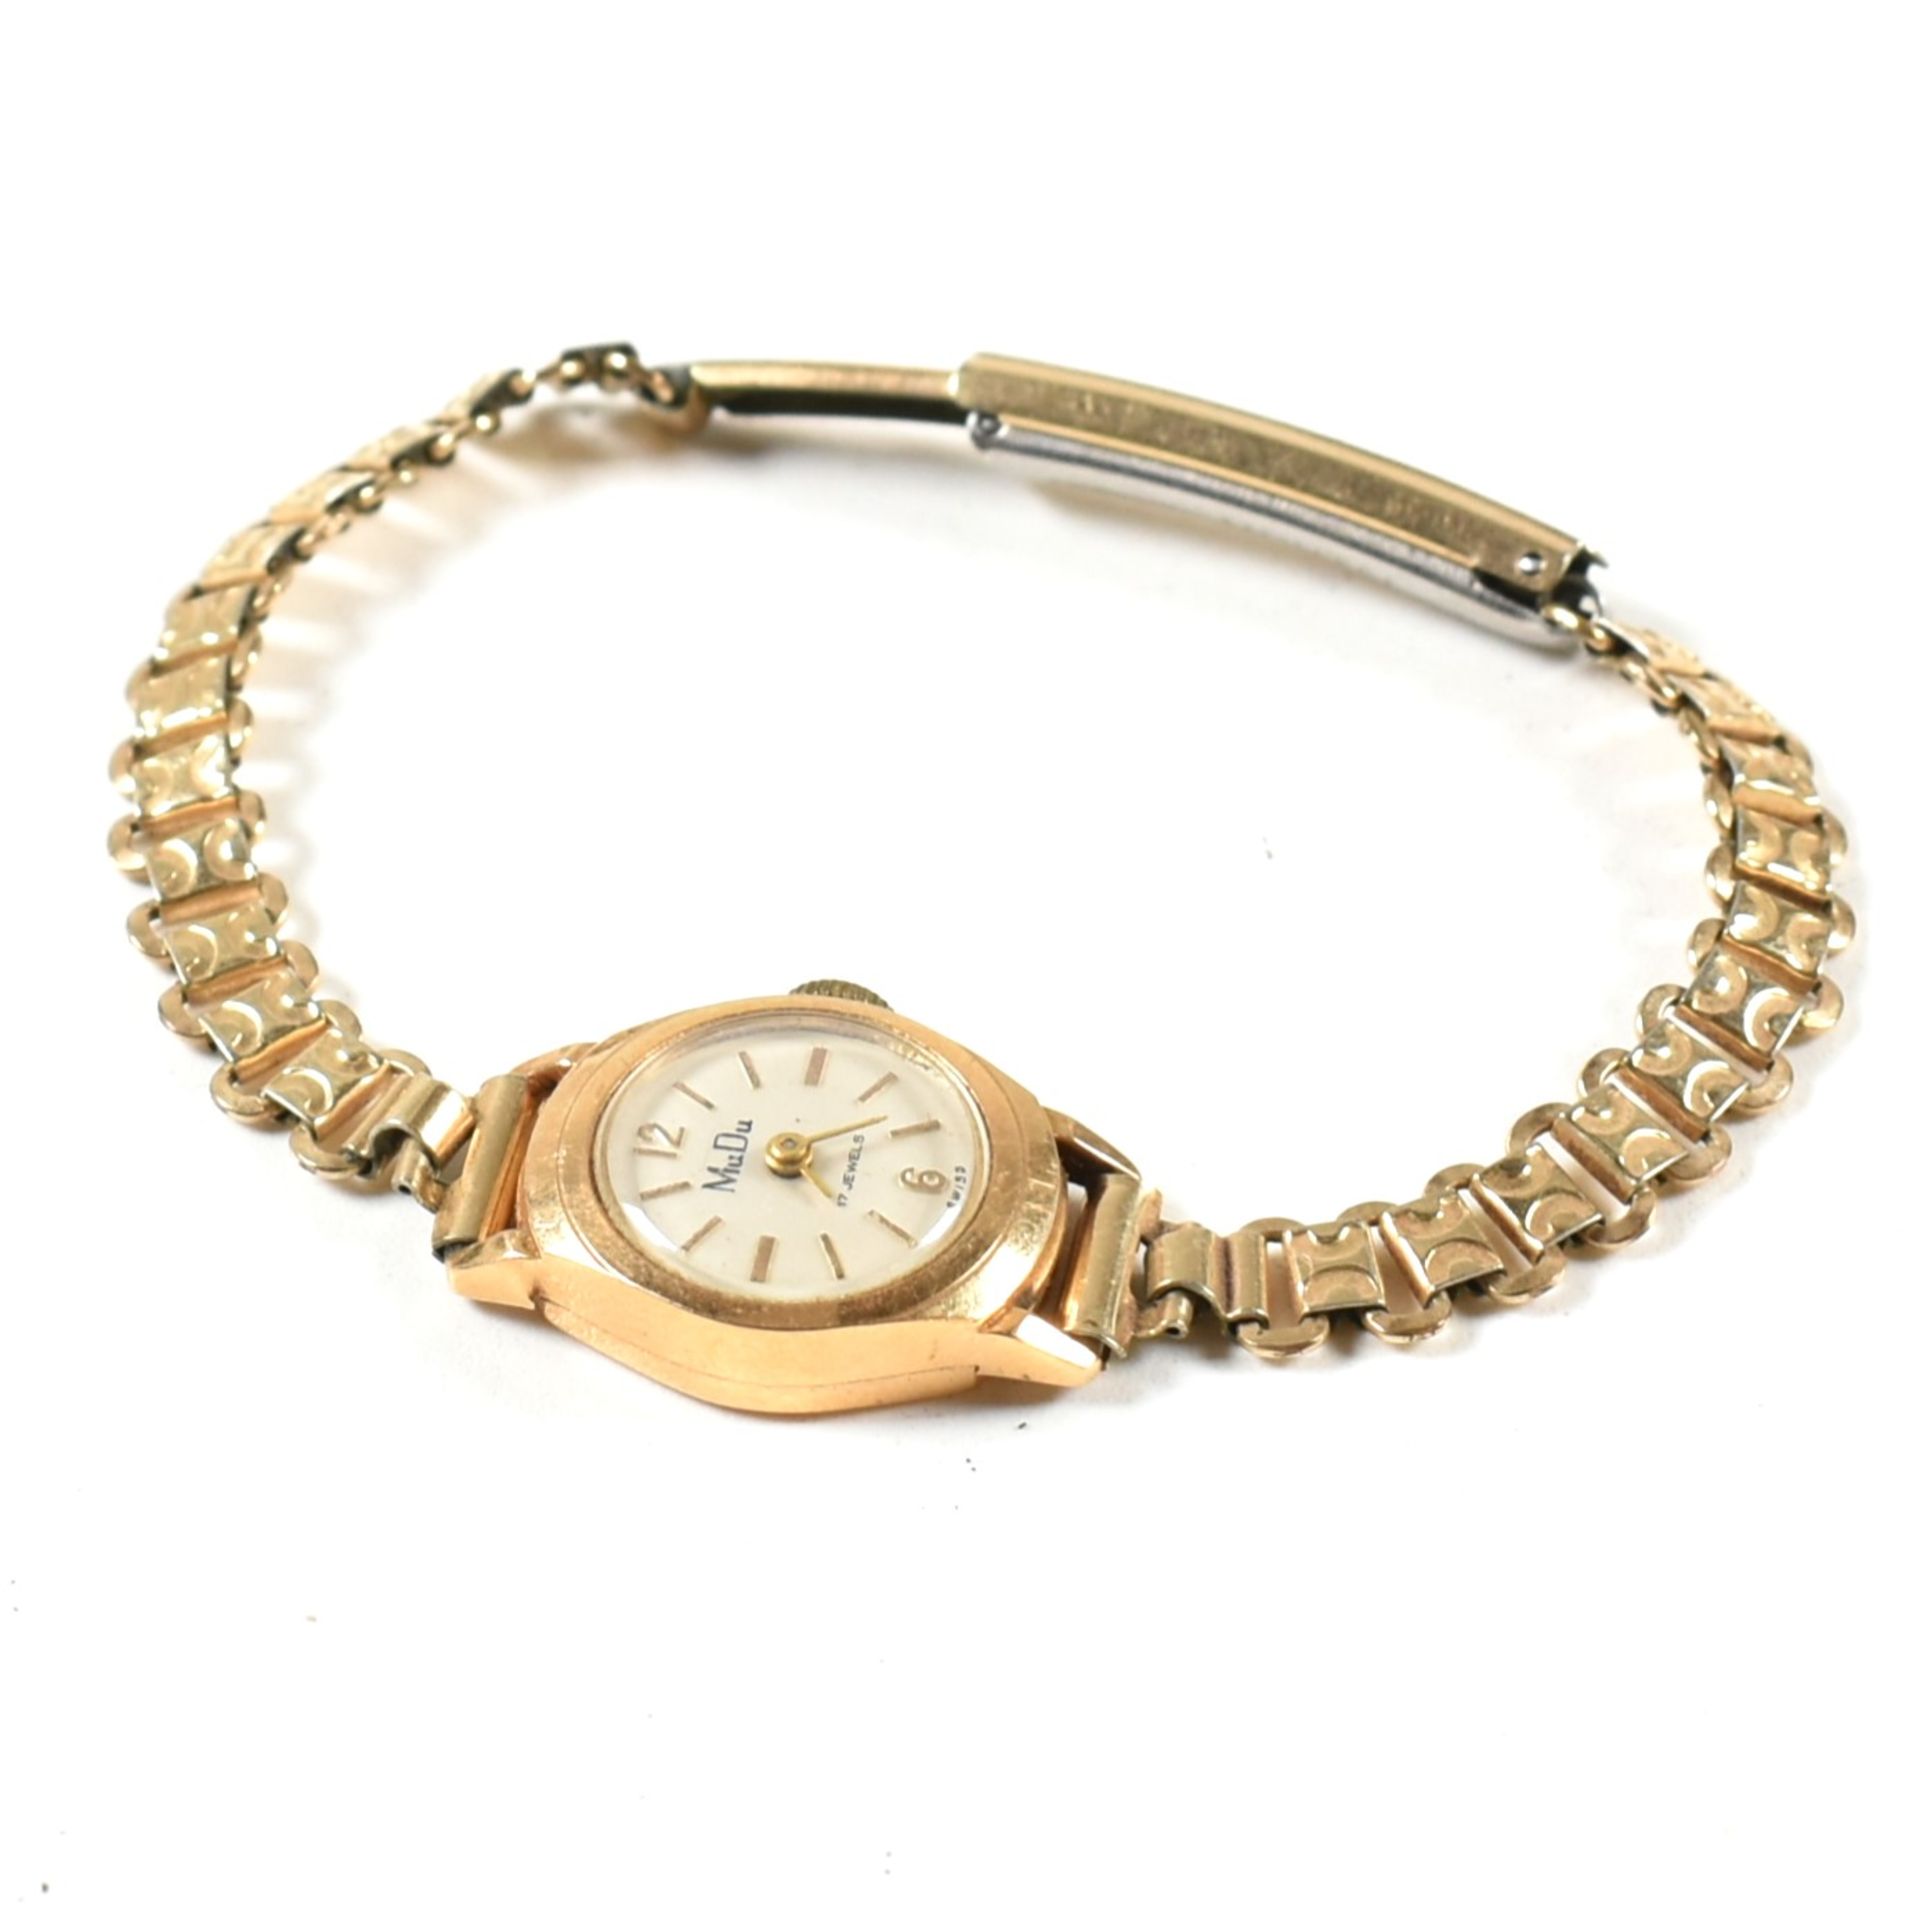 18CT GOLD LADIES WRISTWATCH ON ROLLED GOLD BRACELET STRAP - Image 5 of 5